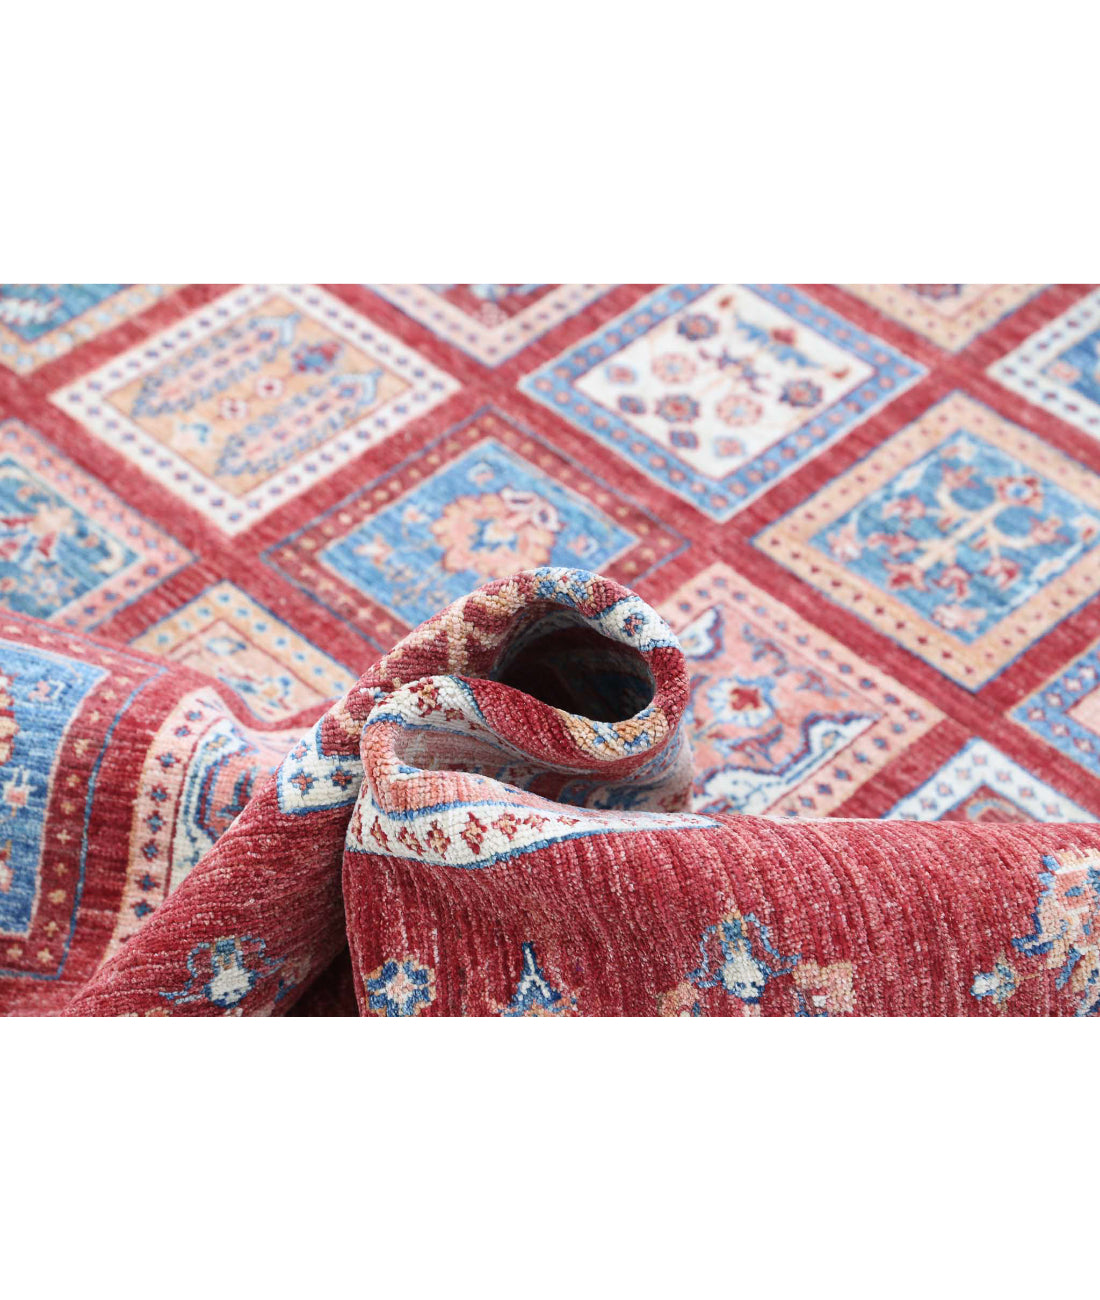 Hand Knotted Bakhtiari Wool Rug - 5'6'' x 7'6'' 5'6'' x 7'6'' (165 X 225) / Red / Red